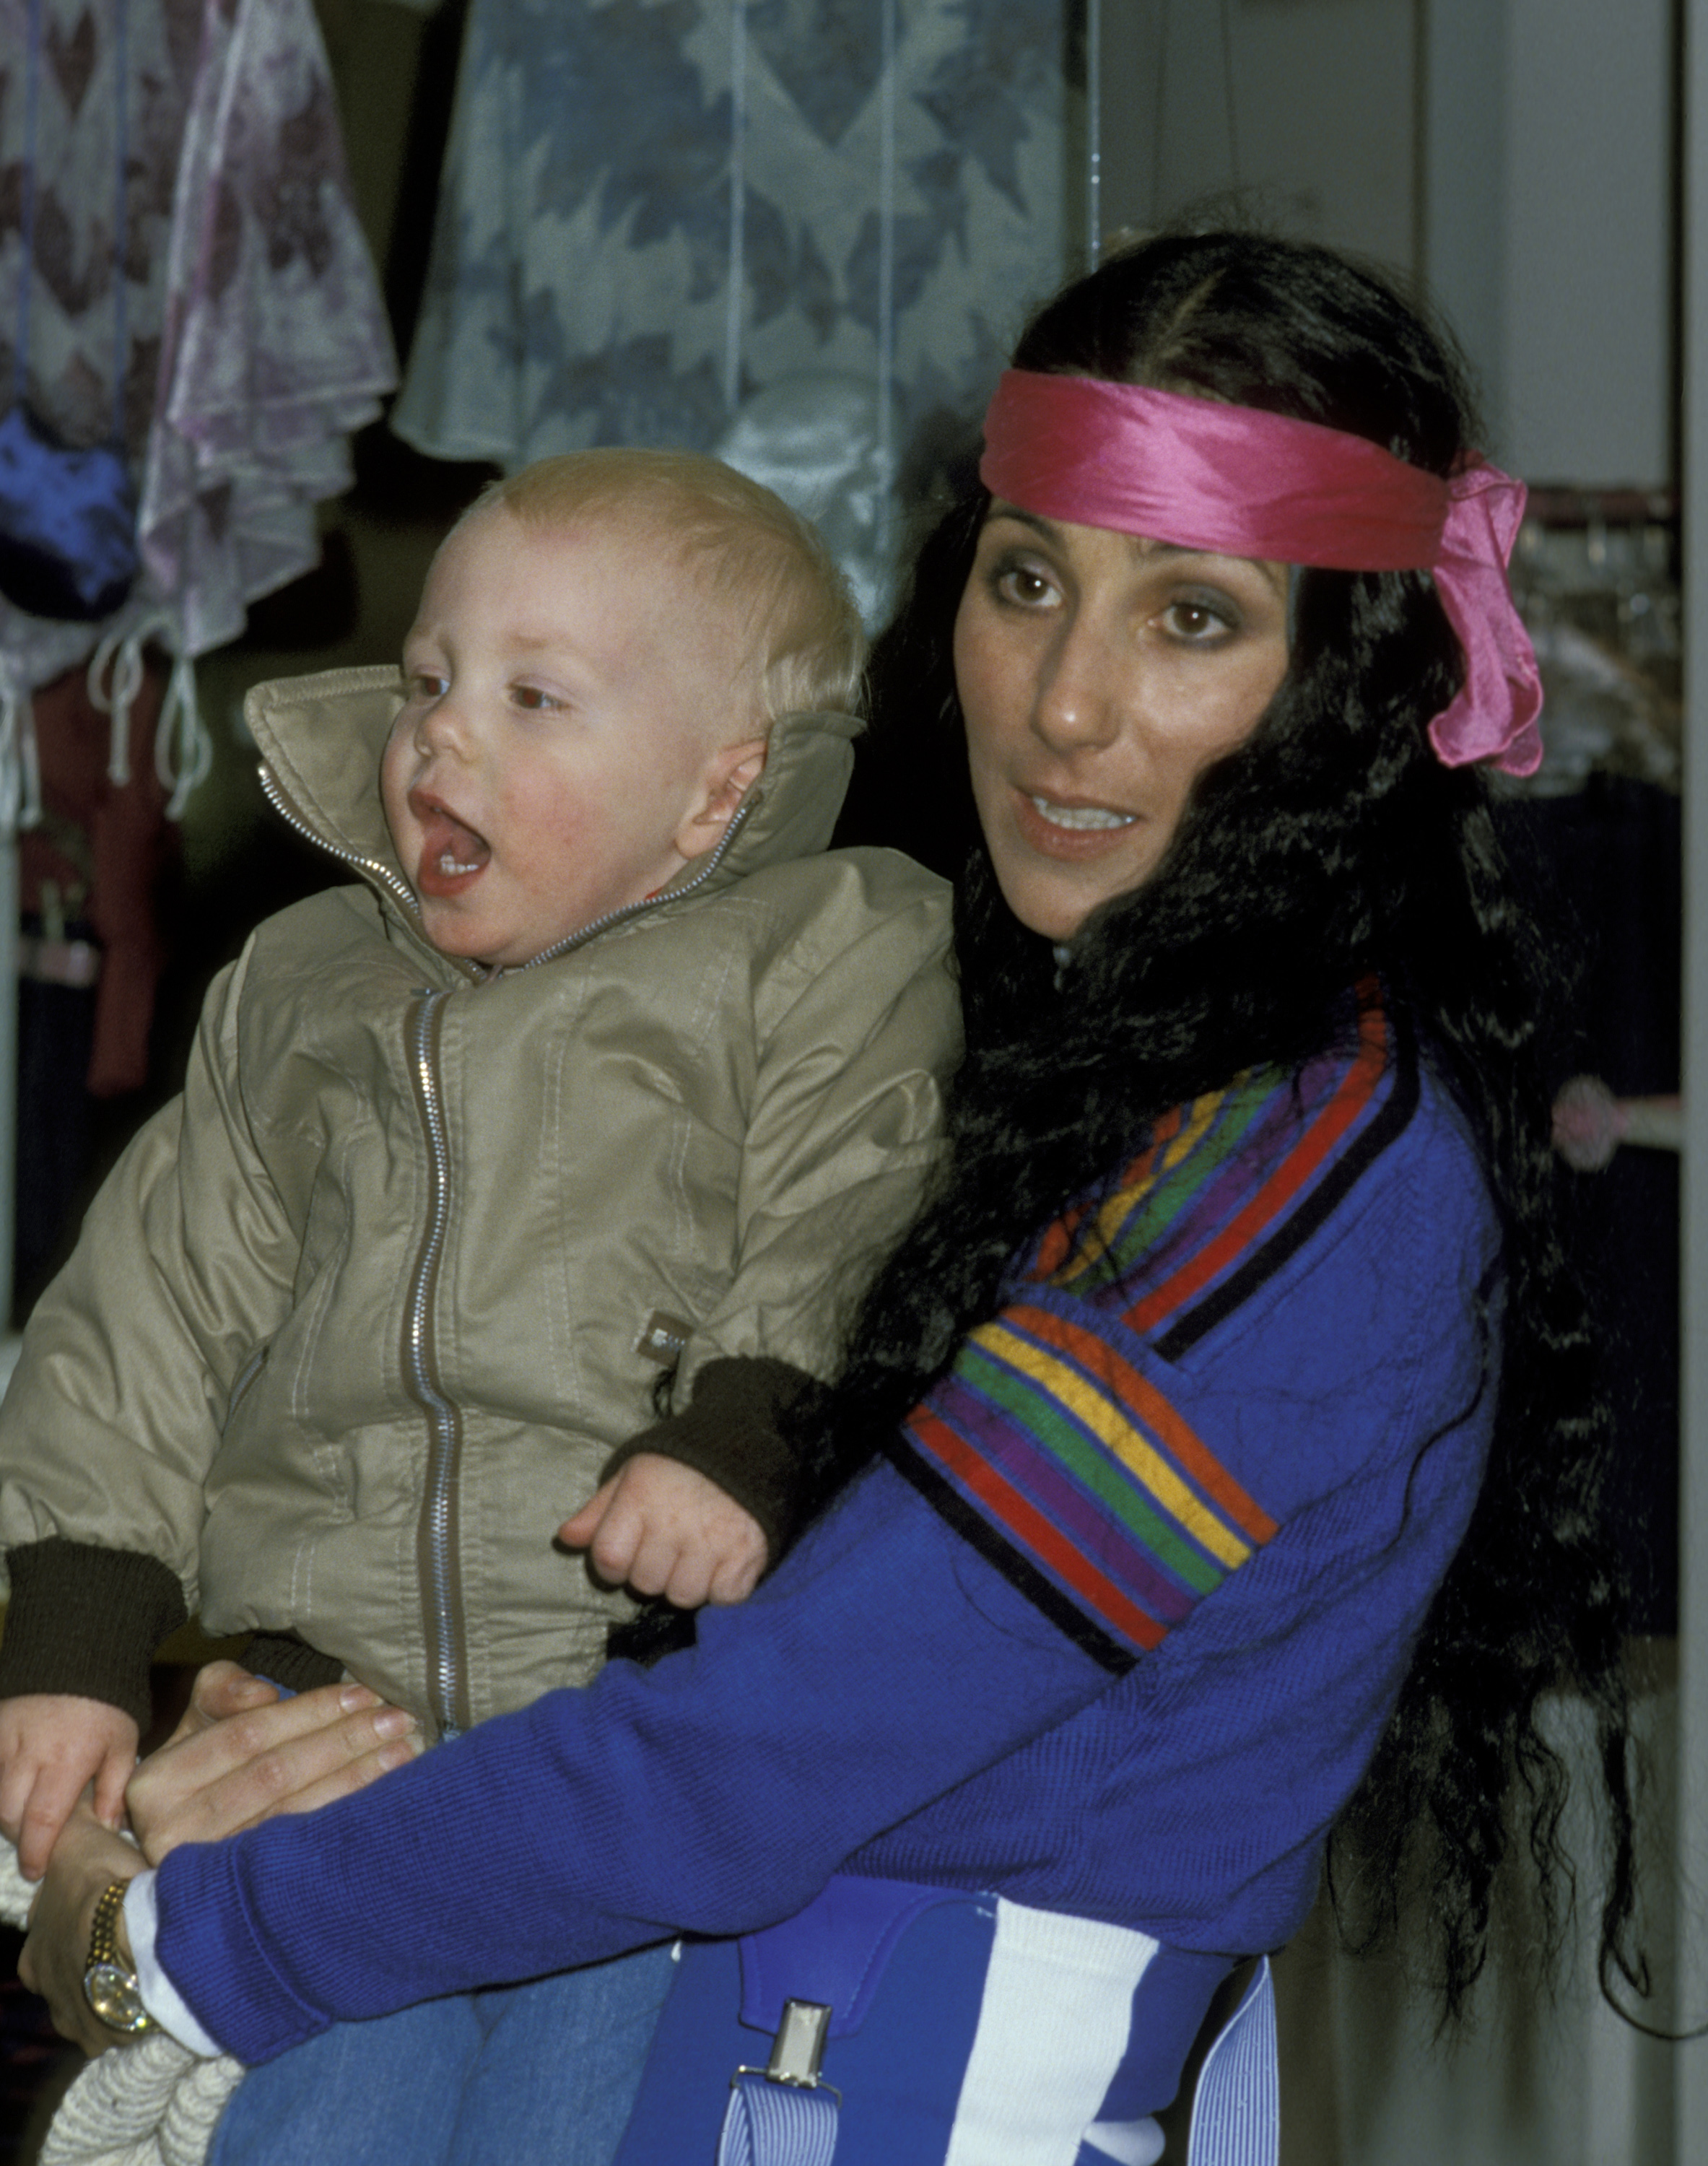 Cher and son Elijah Blue Allman | Source: Getty Images